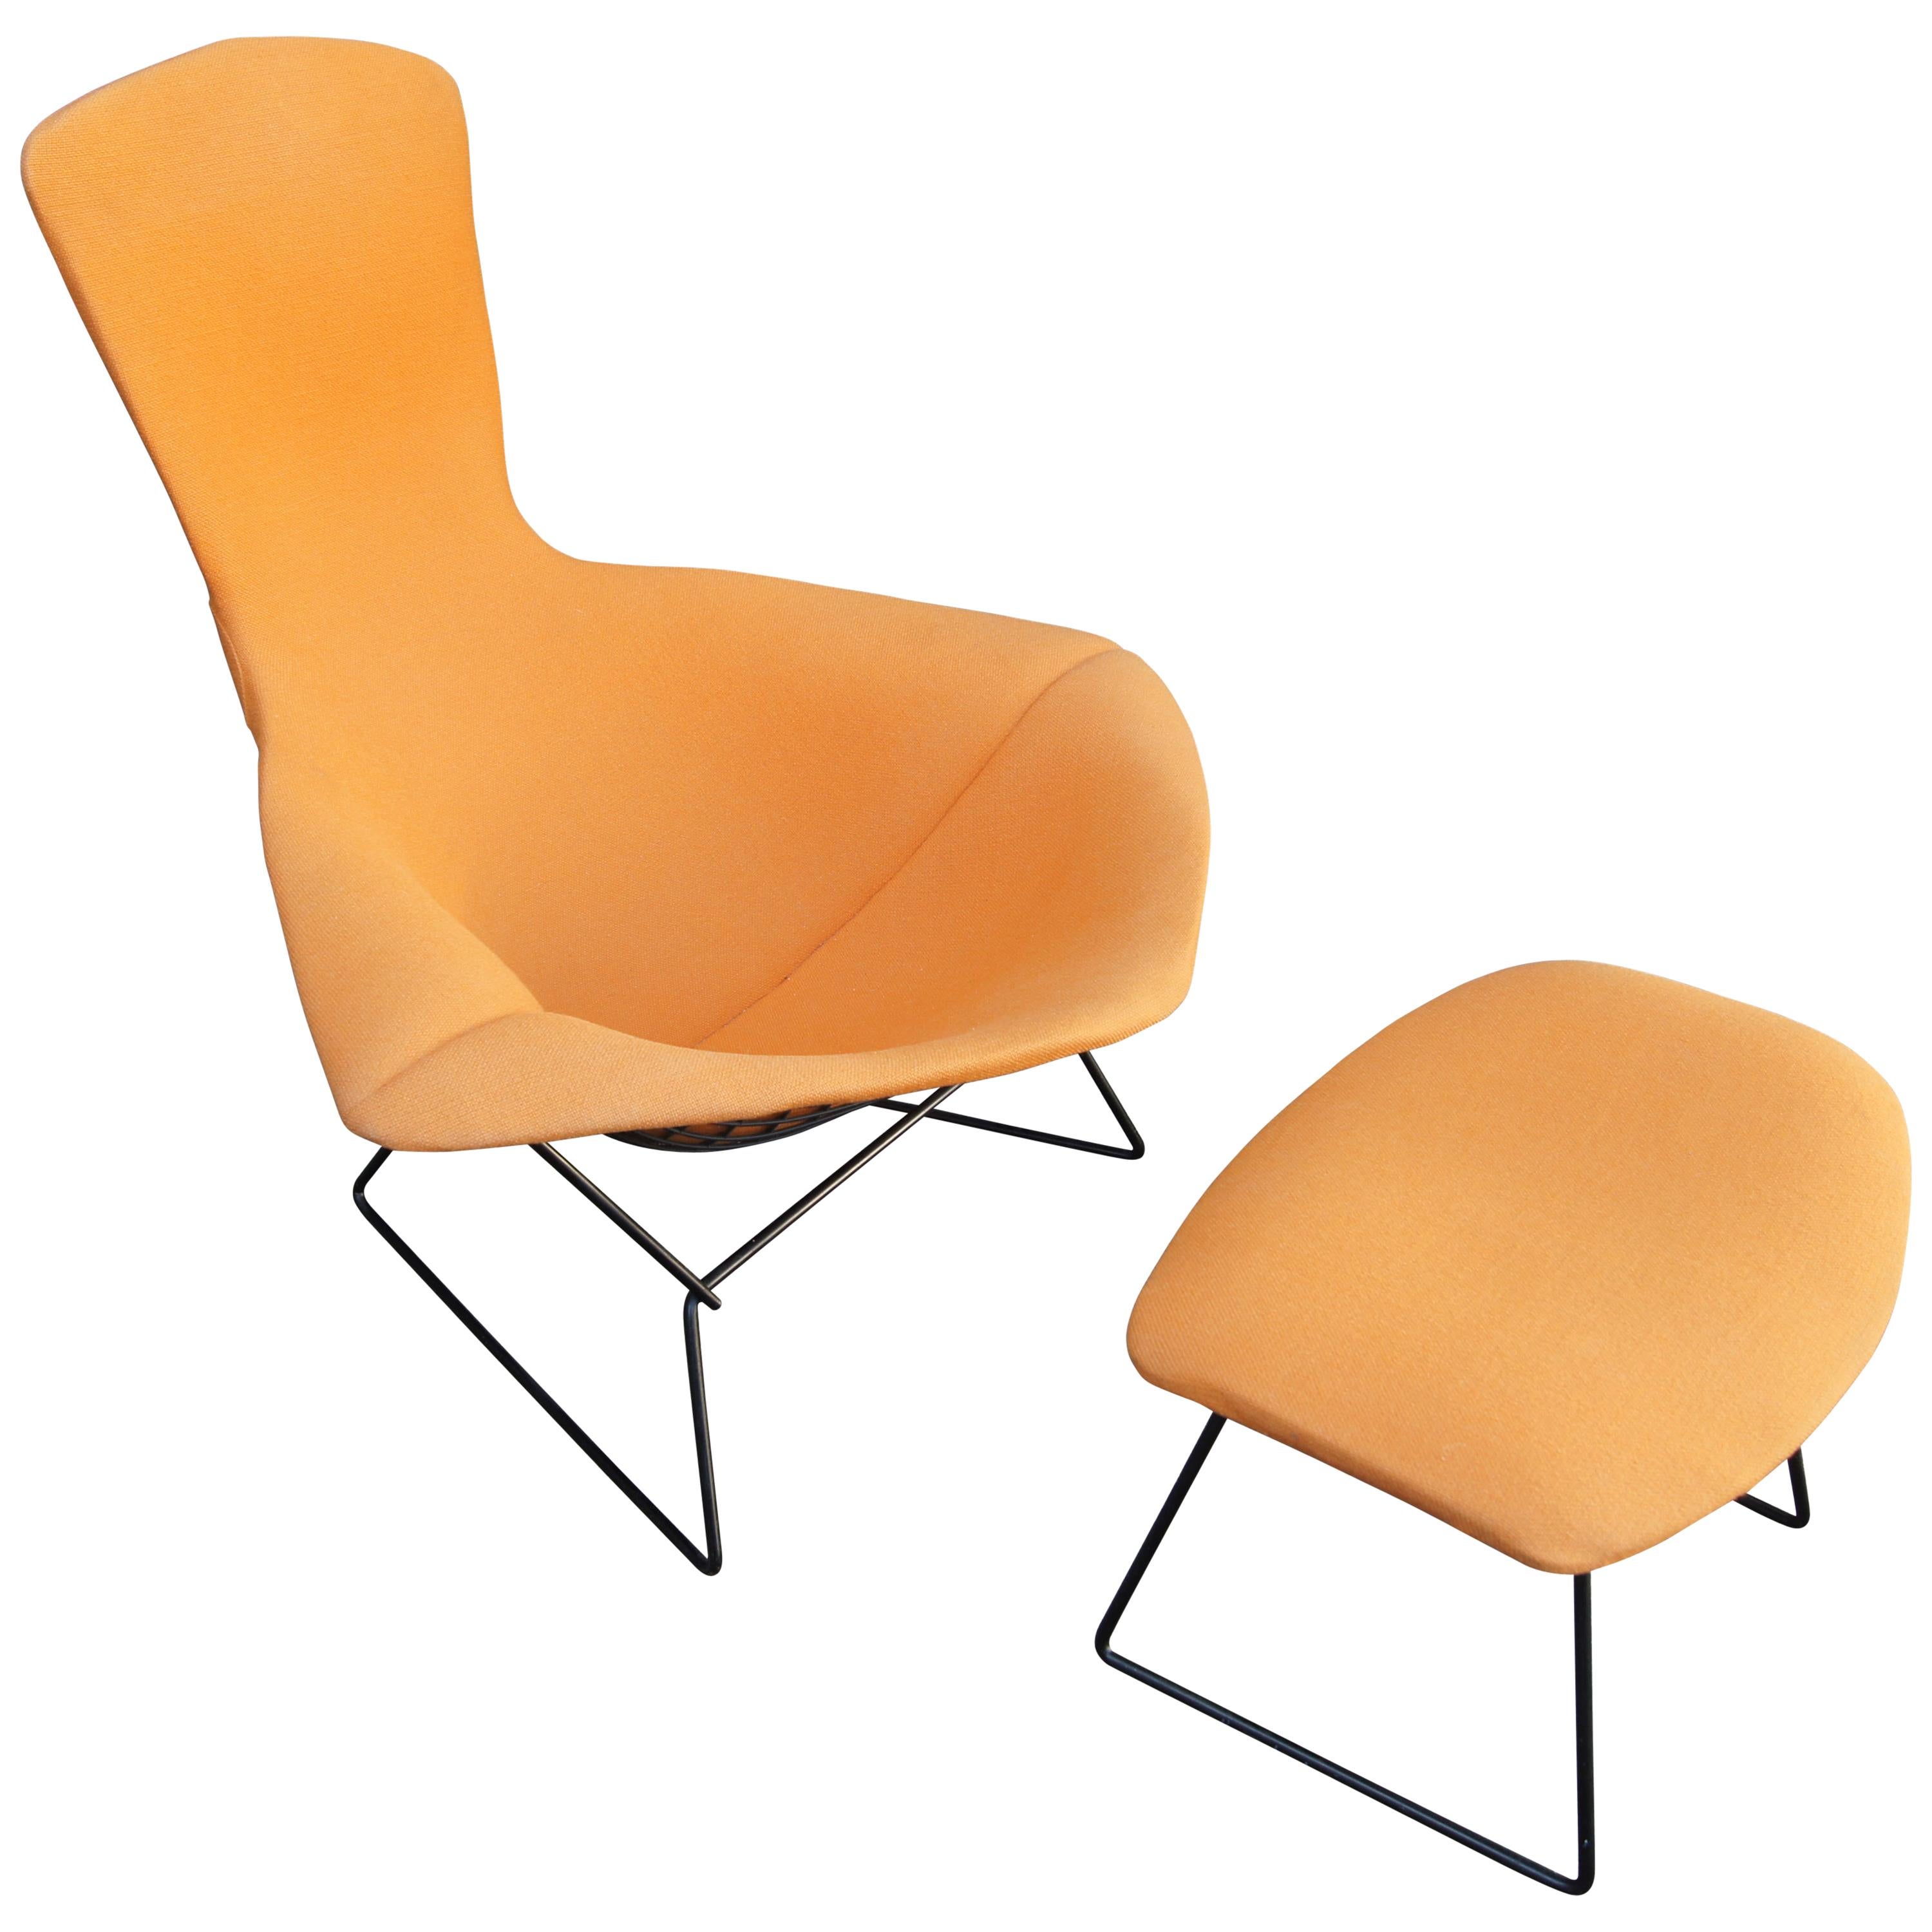 Bird Lounge Chair and Ottoman by Harry Bertoia for Knoll